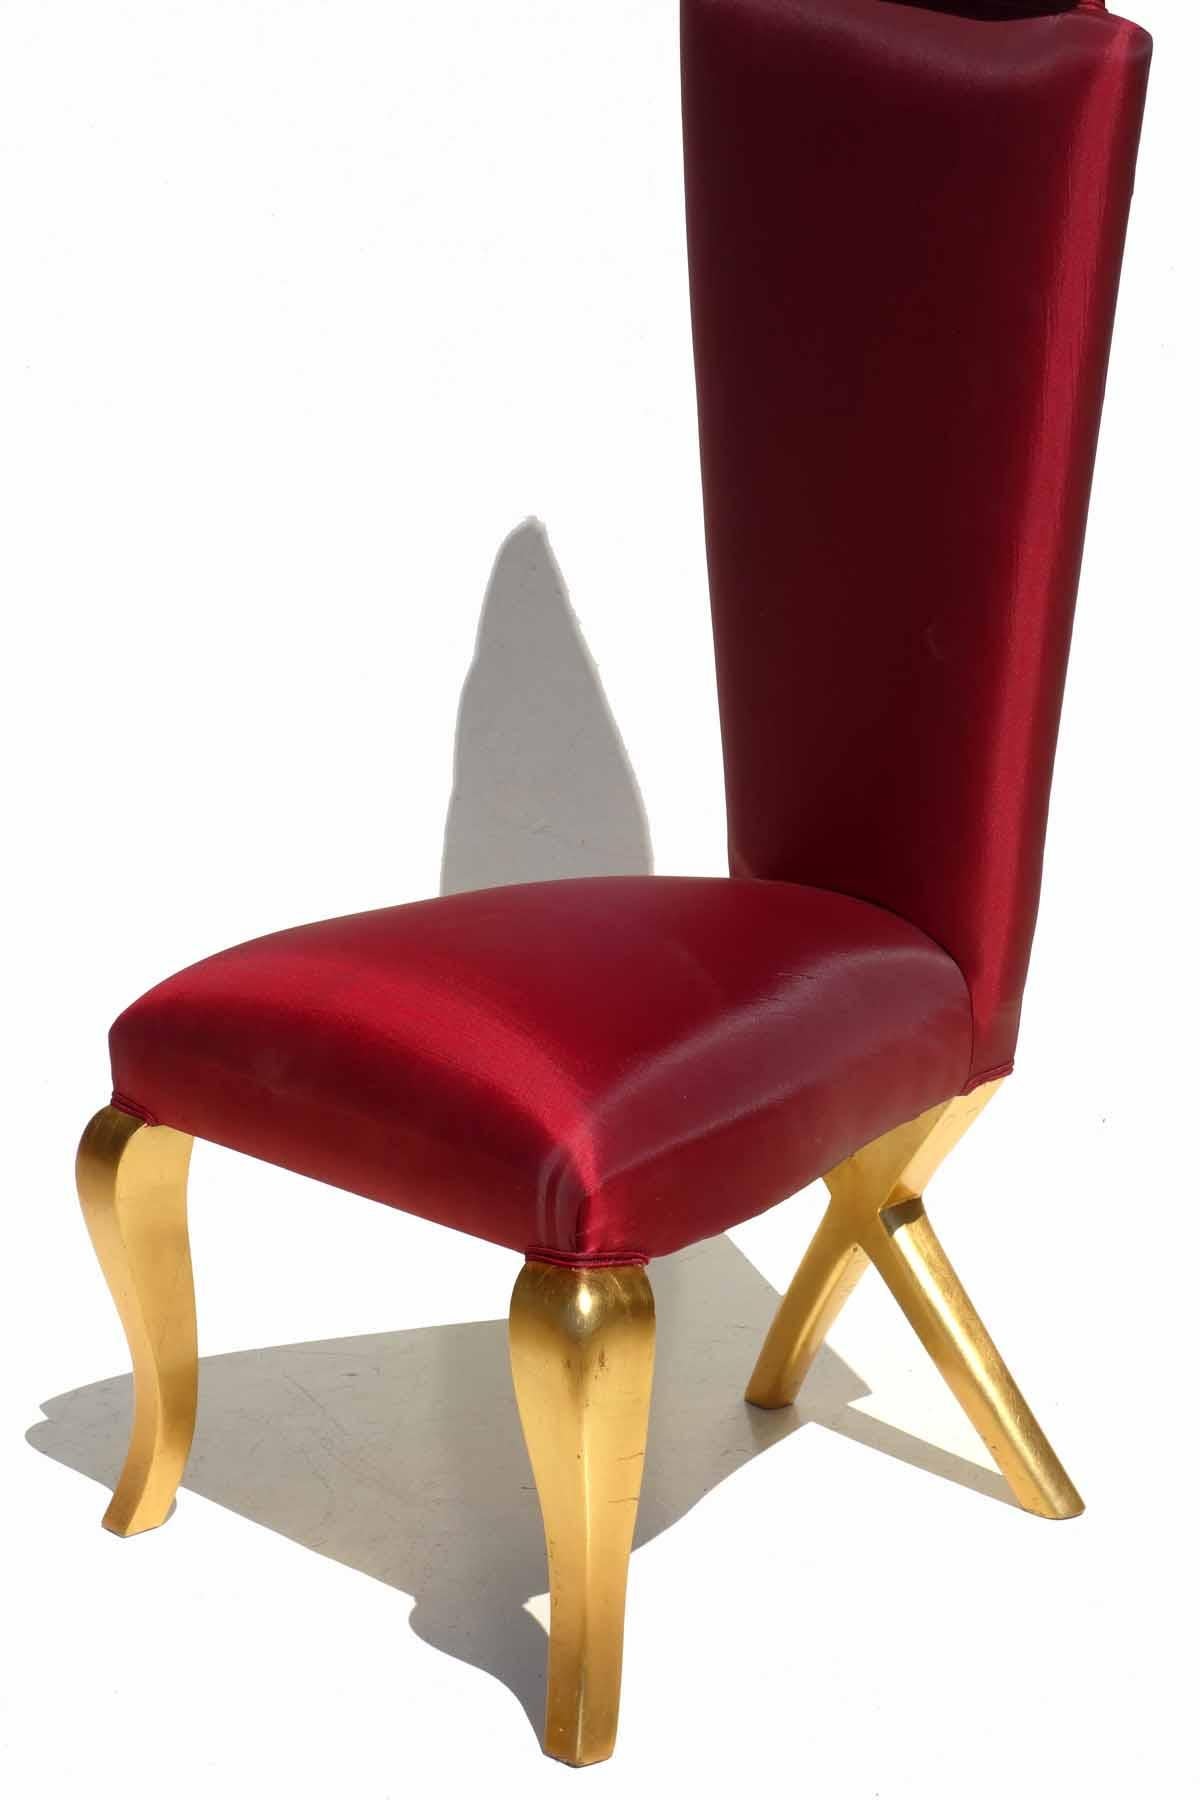 European Surrealistic Modern Gold and Red Pair of Chairs For Sale